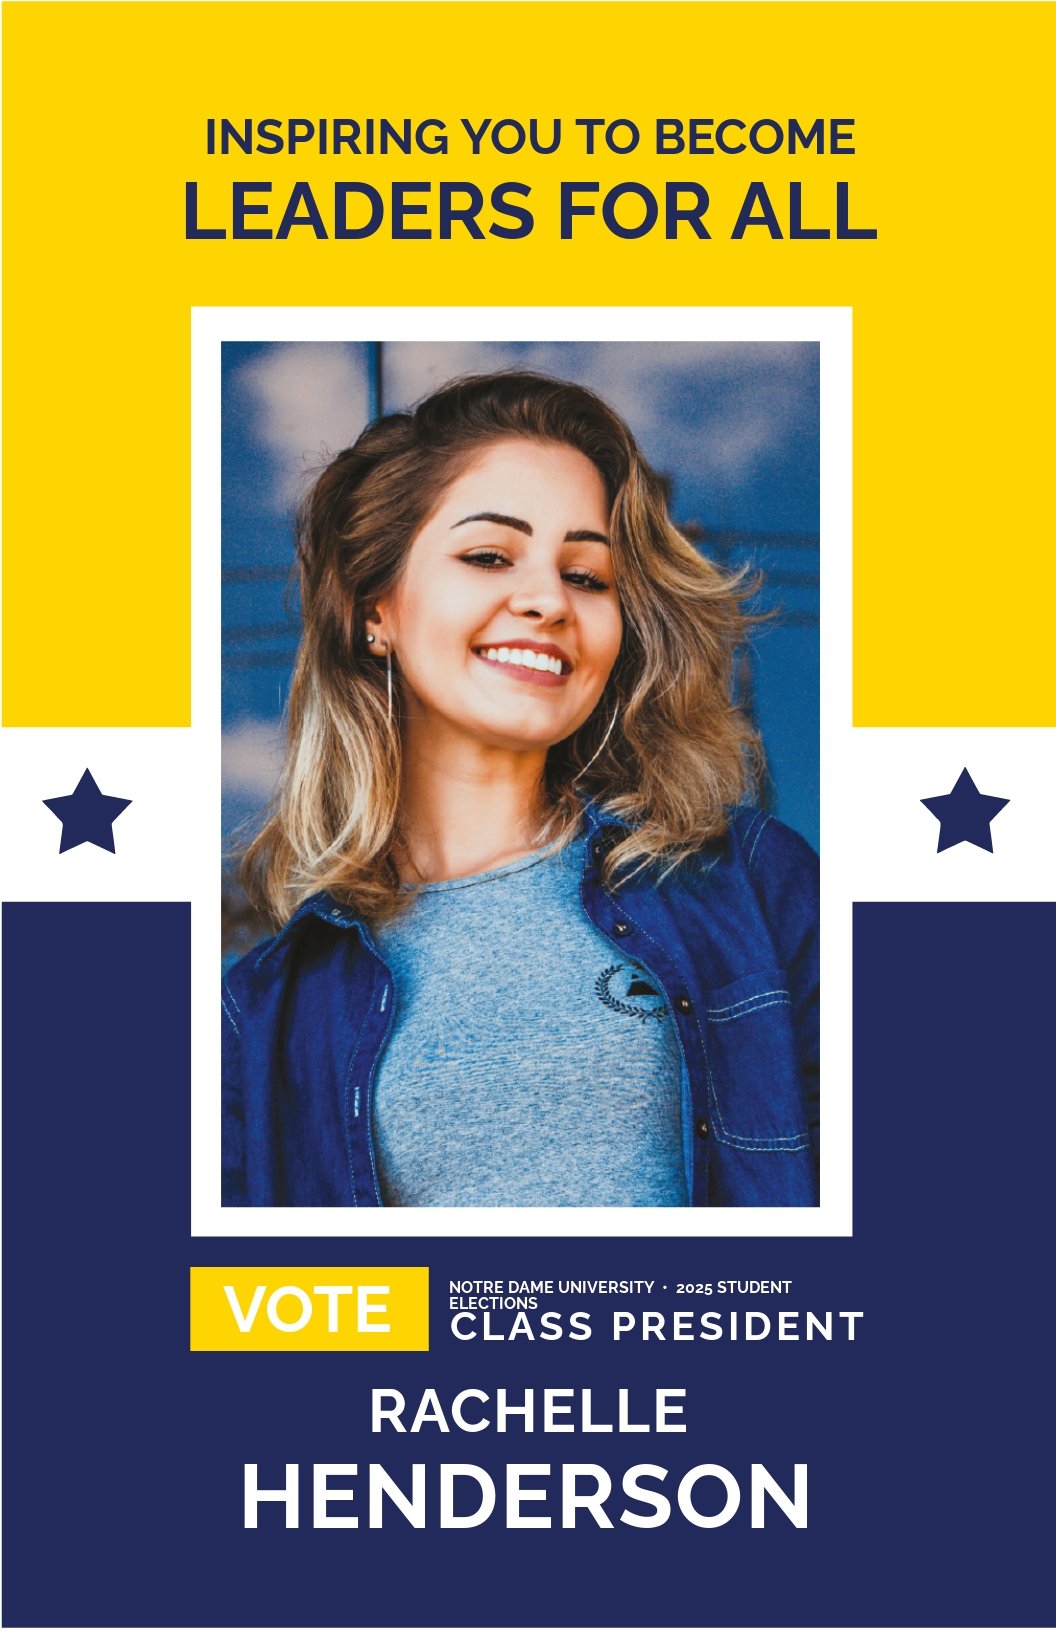 School Election Poster Template in Illustrator, Apple Pages, PSD